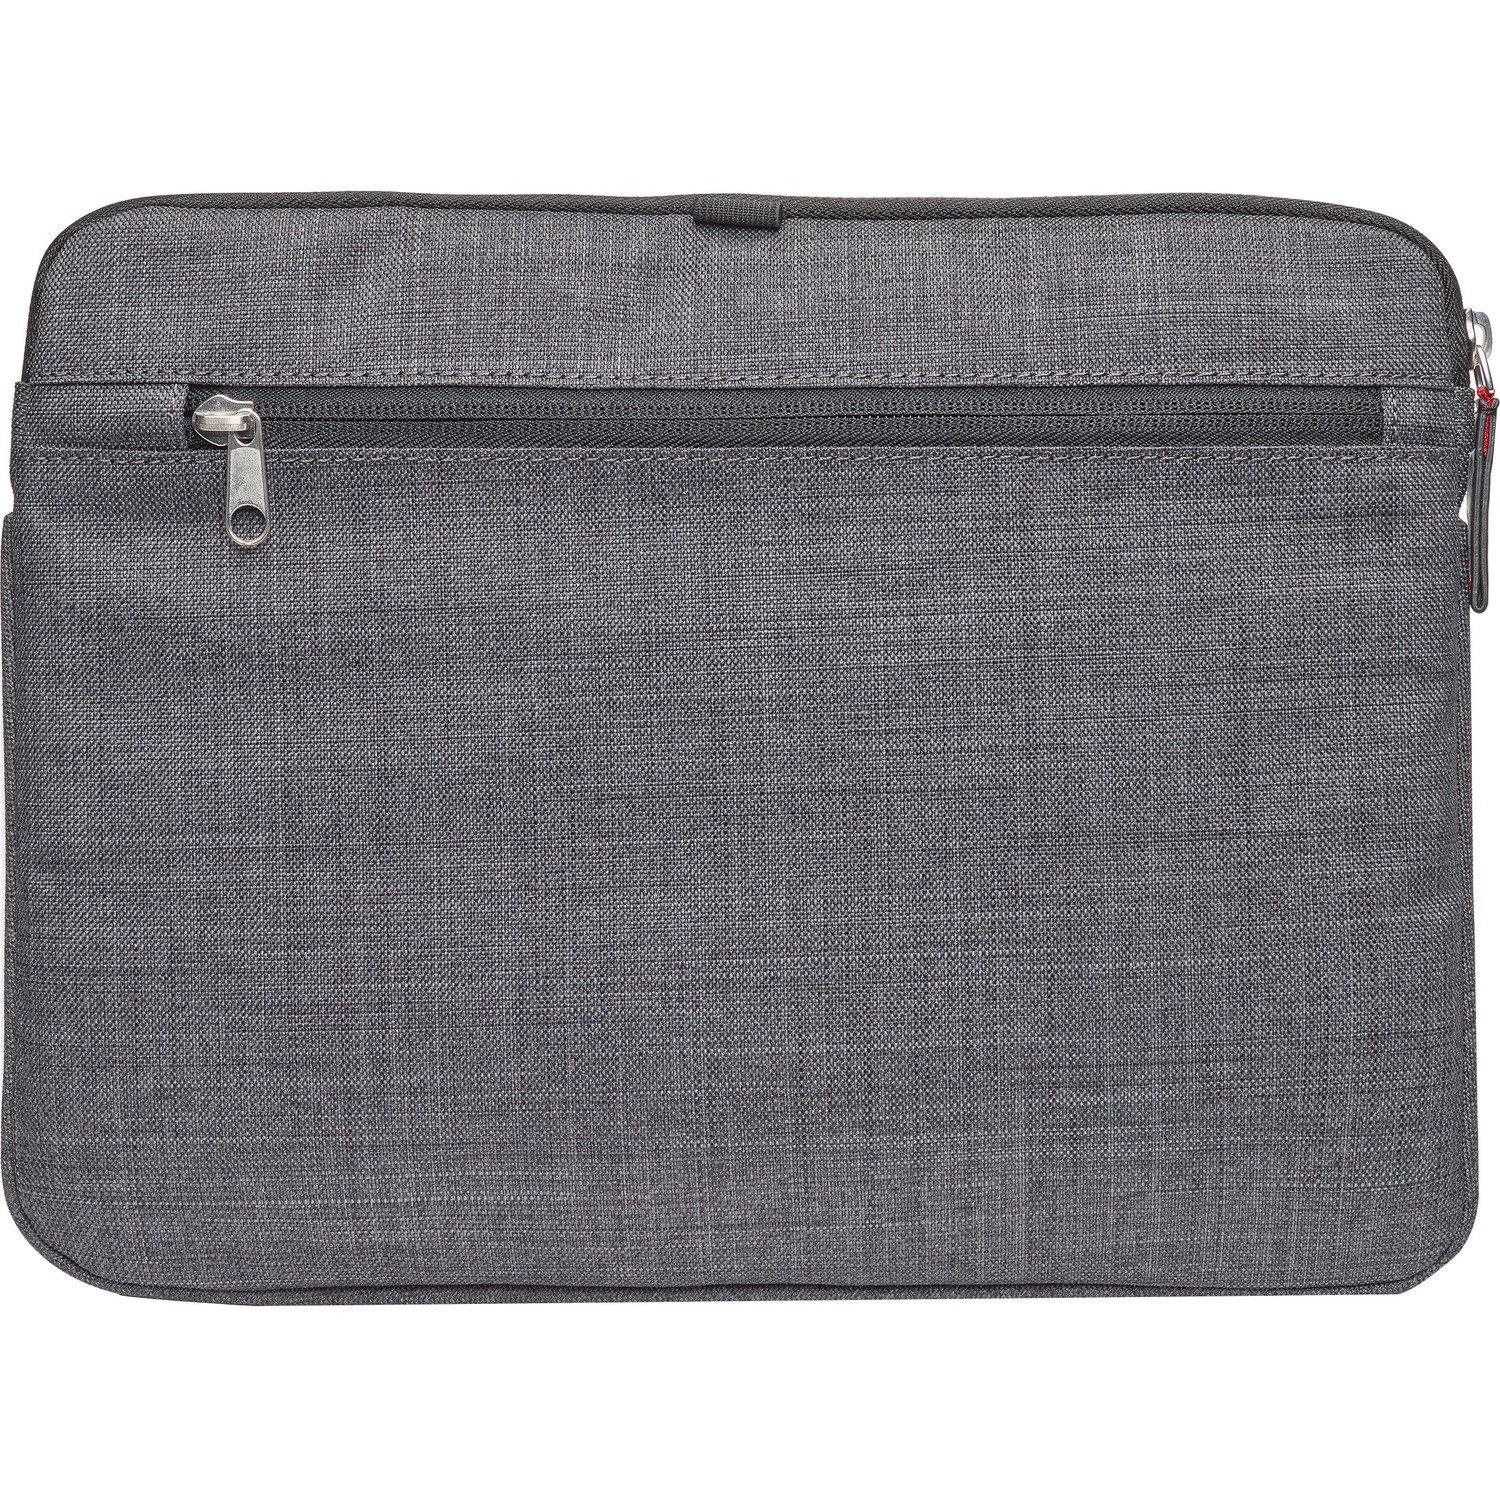 Brenthaven Collins 1946 Carrying Case (Sleeve) Tablet - Graphite